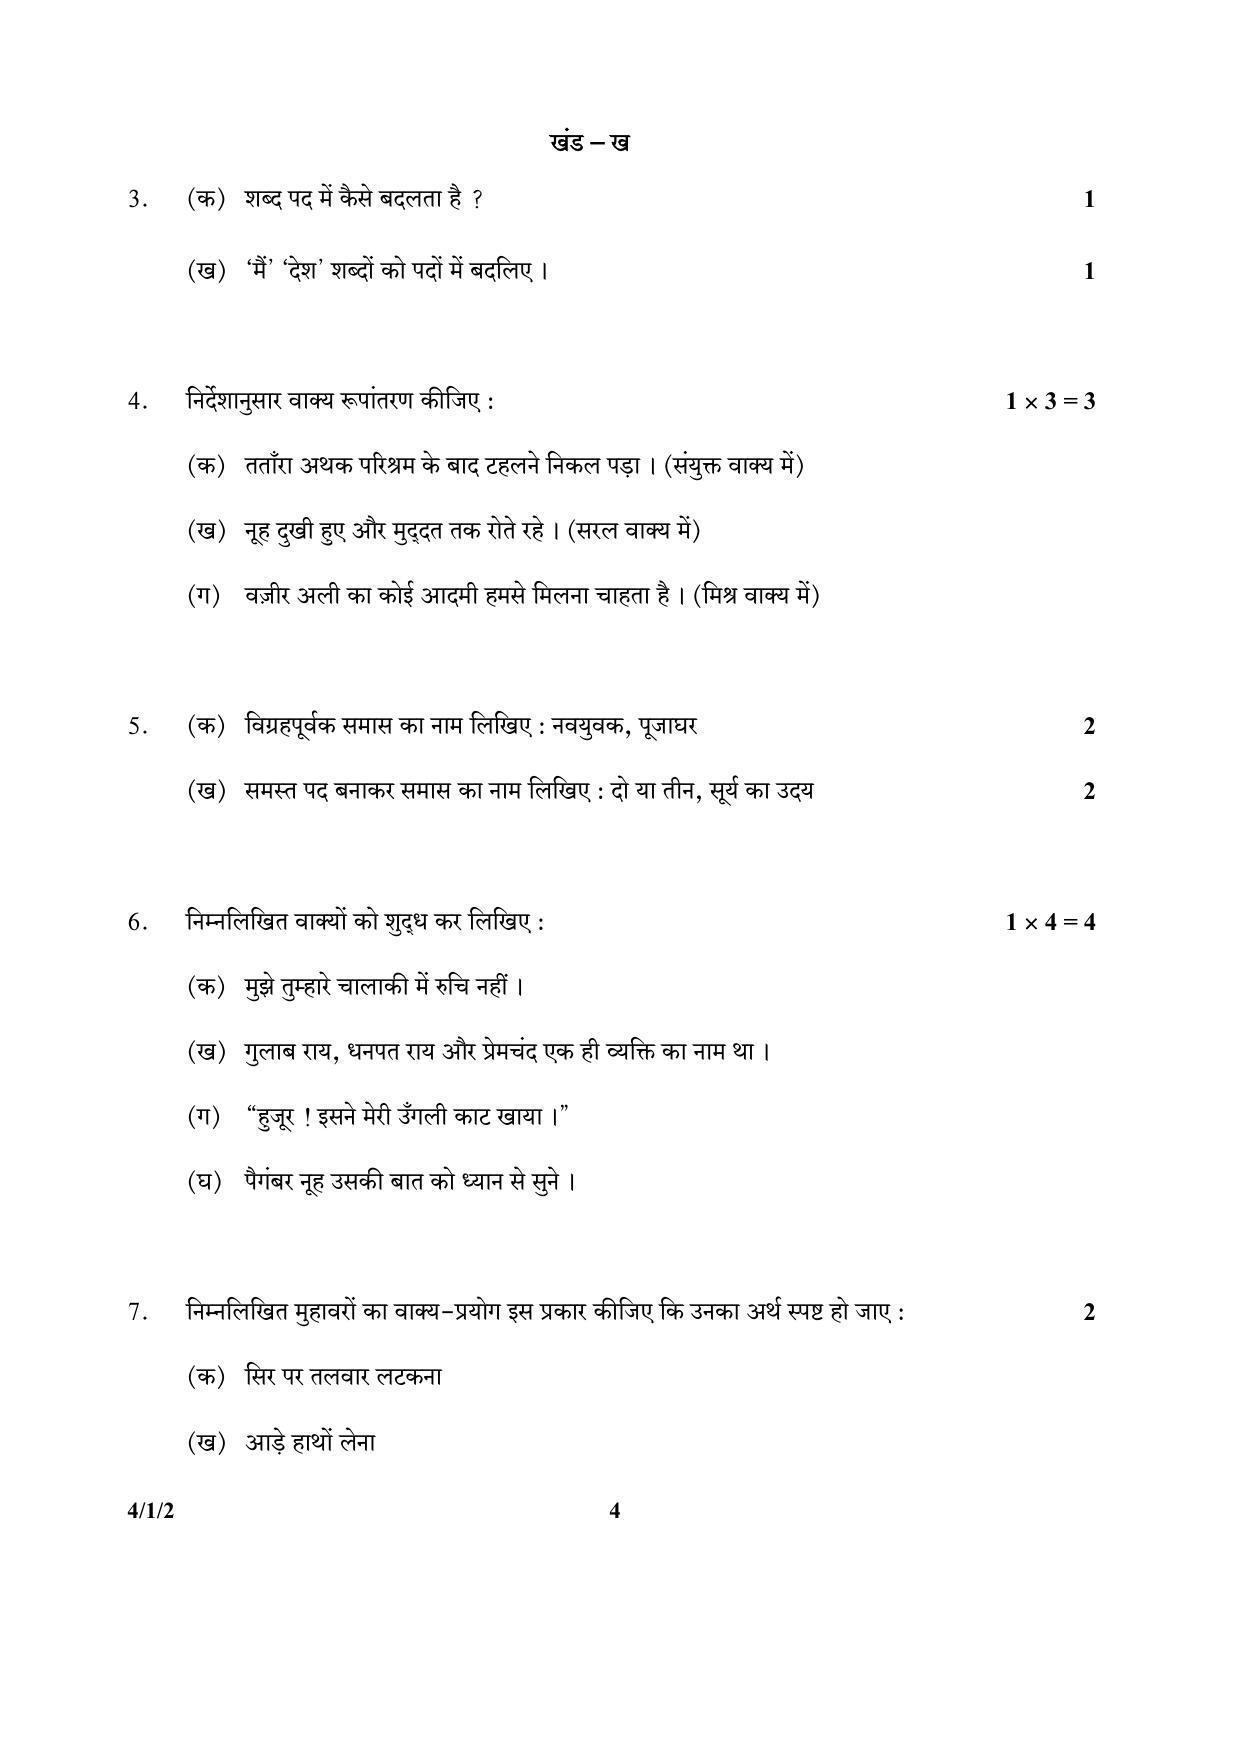 CBSE Class 10 4-1-2_Hindi 2017-comptt Question Paper - Page 4